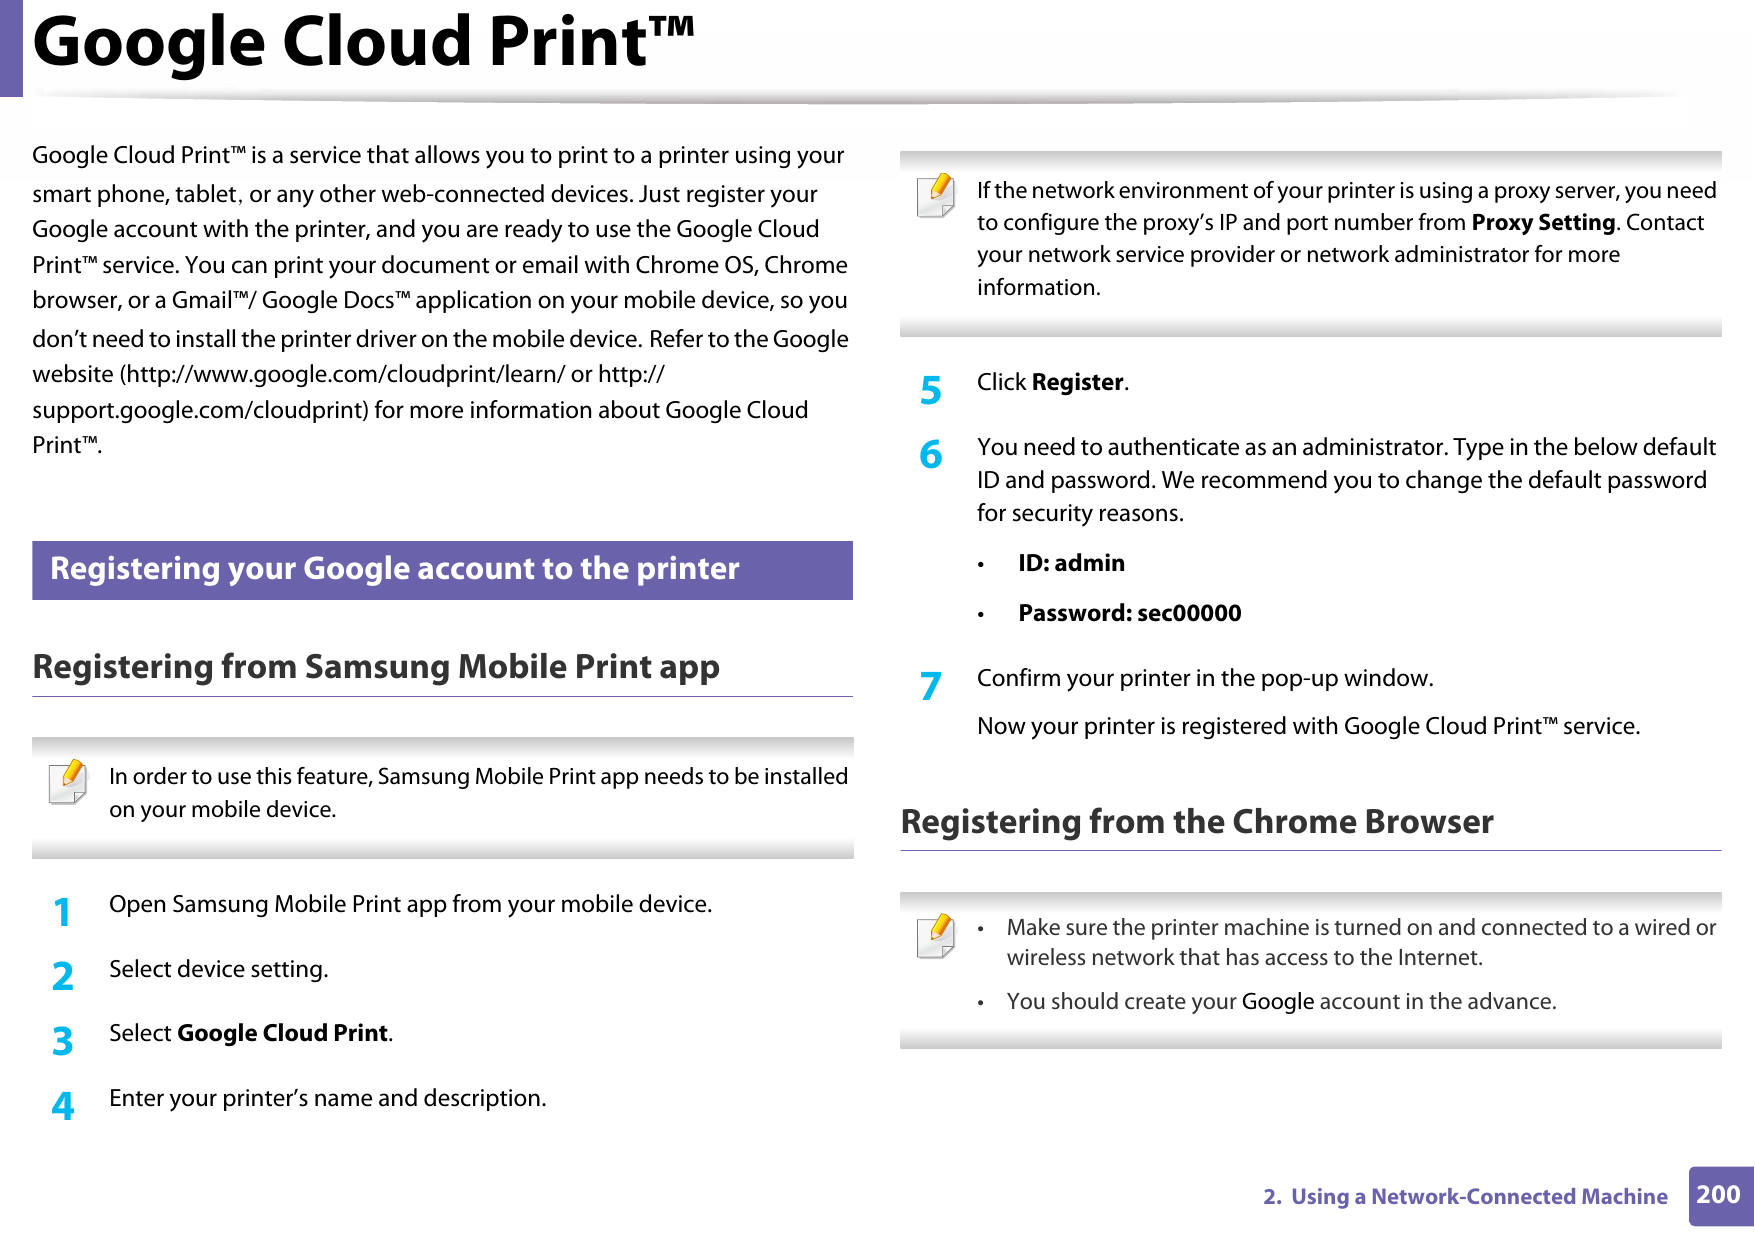 2002.  Using a Network-Connected MachineGoogle Cloud Print™Google Cloud Print™ is a service that allows you to print to a printer using your smart phone, tablet, or any other web-connected devices. Just register your Google account with the printer, and you are ready to use the Google Cloud Print™ service. You can print your document or email with Chrome OS, Chrome browser, or a Gmail™/ Google Docs™ application on your mobile device, so you don’t need to install the printer driver on the mobile device. Refer to the Google website (http://www.google.com/cloudprint/learn/ or http://support.google.com/cloudprint) for more information about Google Cloud Print™.32 Registering your Google account to the printerRegistering from Samsung Mobile Print app In order to use this feature, Samsung Mobile Print app needs to be installed on your mobile device. 1Open Samsung Mobile Print app from your mobile device.2  Select device setting.3  Select Google Cloud Print.4  Enter your printer’s name and description. If the network environment of your printer is using a proxy server, you need to configure the proxy’s IP and port number from Proxy Setting. Contact your network service provider or network administrator for more information. 5  Click Register.6  You need to authenticate as an administrator. Type in the below default ID and password. We recommend you to change the default password for security reasons.•ID: admin•Password: sec00000 7  Confirm your printer in the pop-up window.Now your printer is registered with Google Cloud Print™ service.Registering from the Chrome Browser • Make sure the printer machine is turned on and connected to a wired or wireless network that has access to the Internet. • You should create your Google account in the advance.  